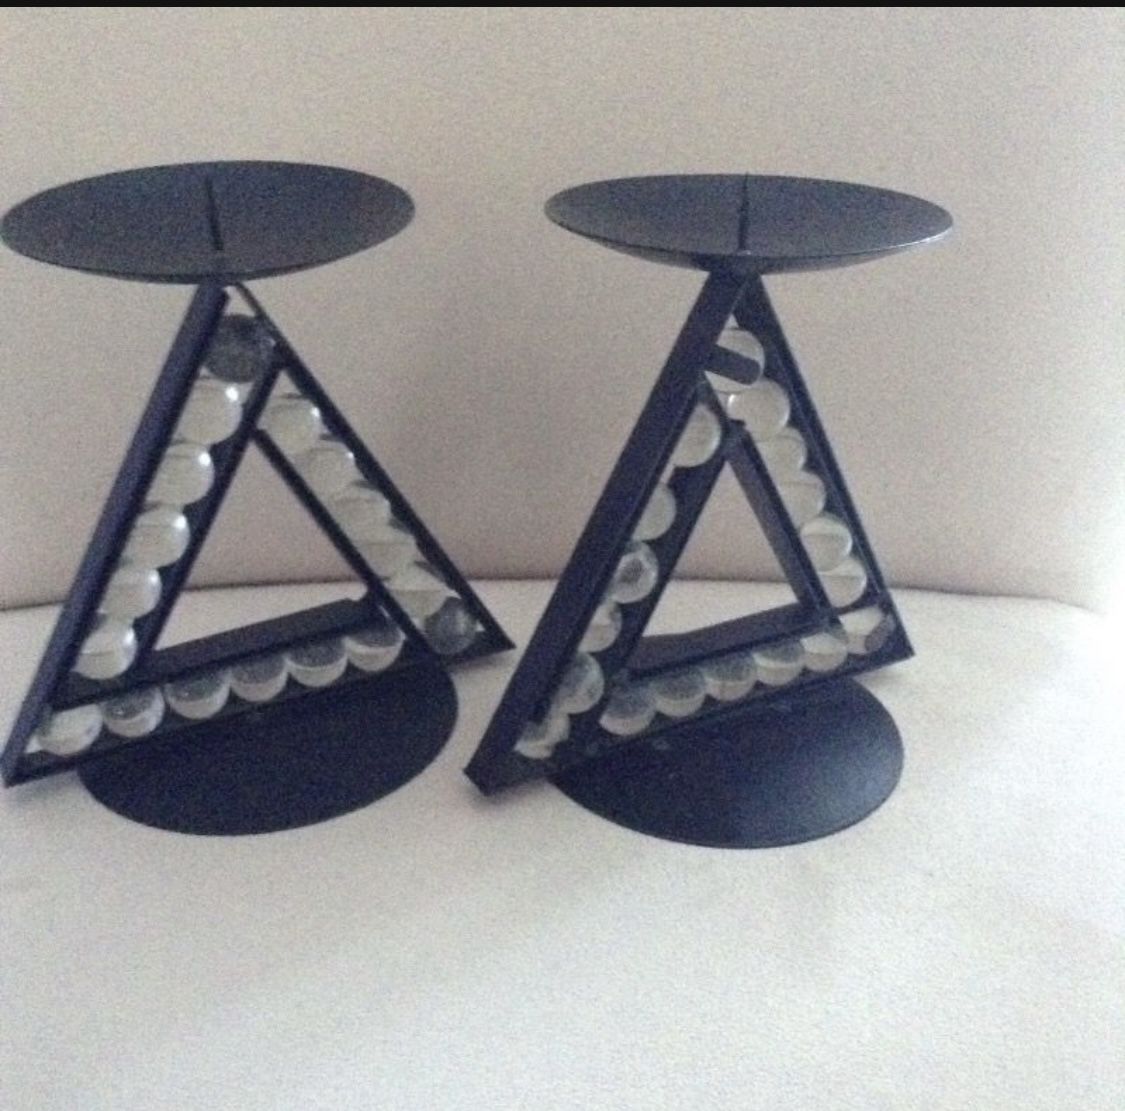 New candle holders, two for $9